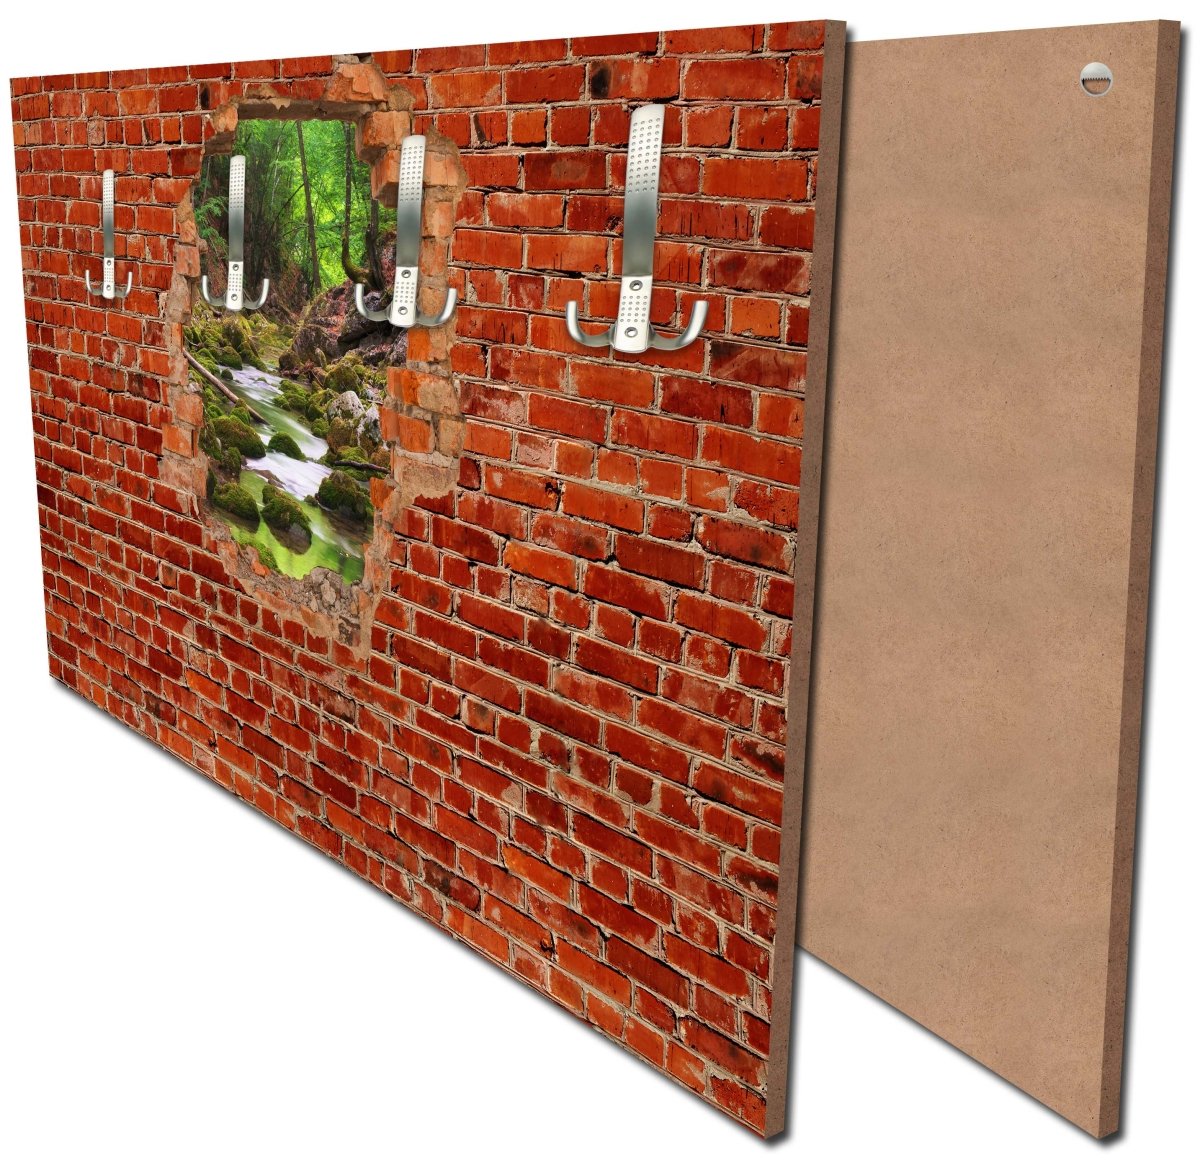 Wardrobe River in the Forest - Red Brick M0617